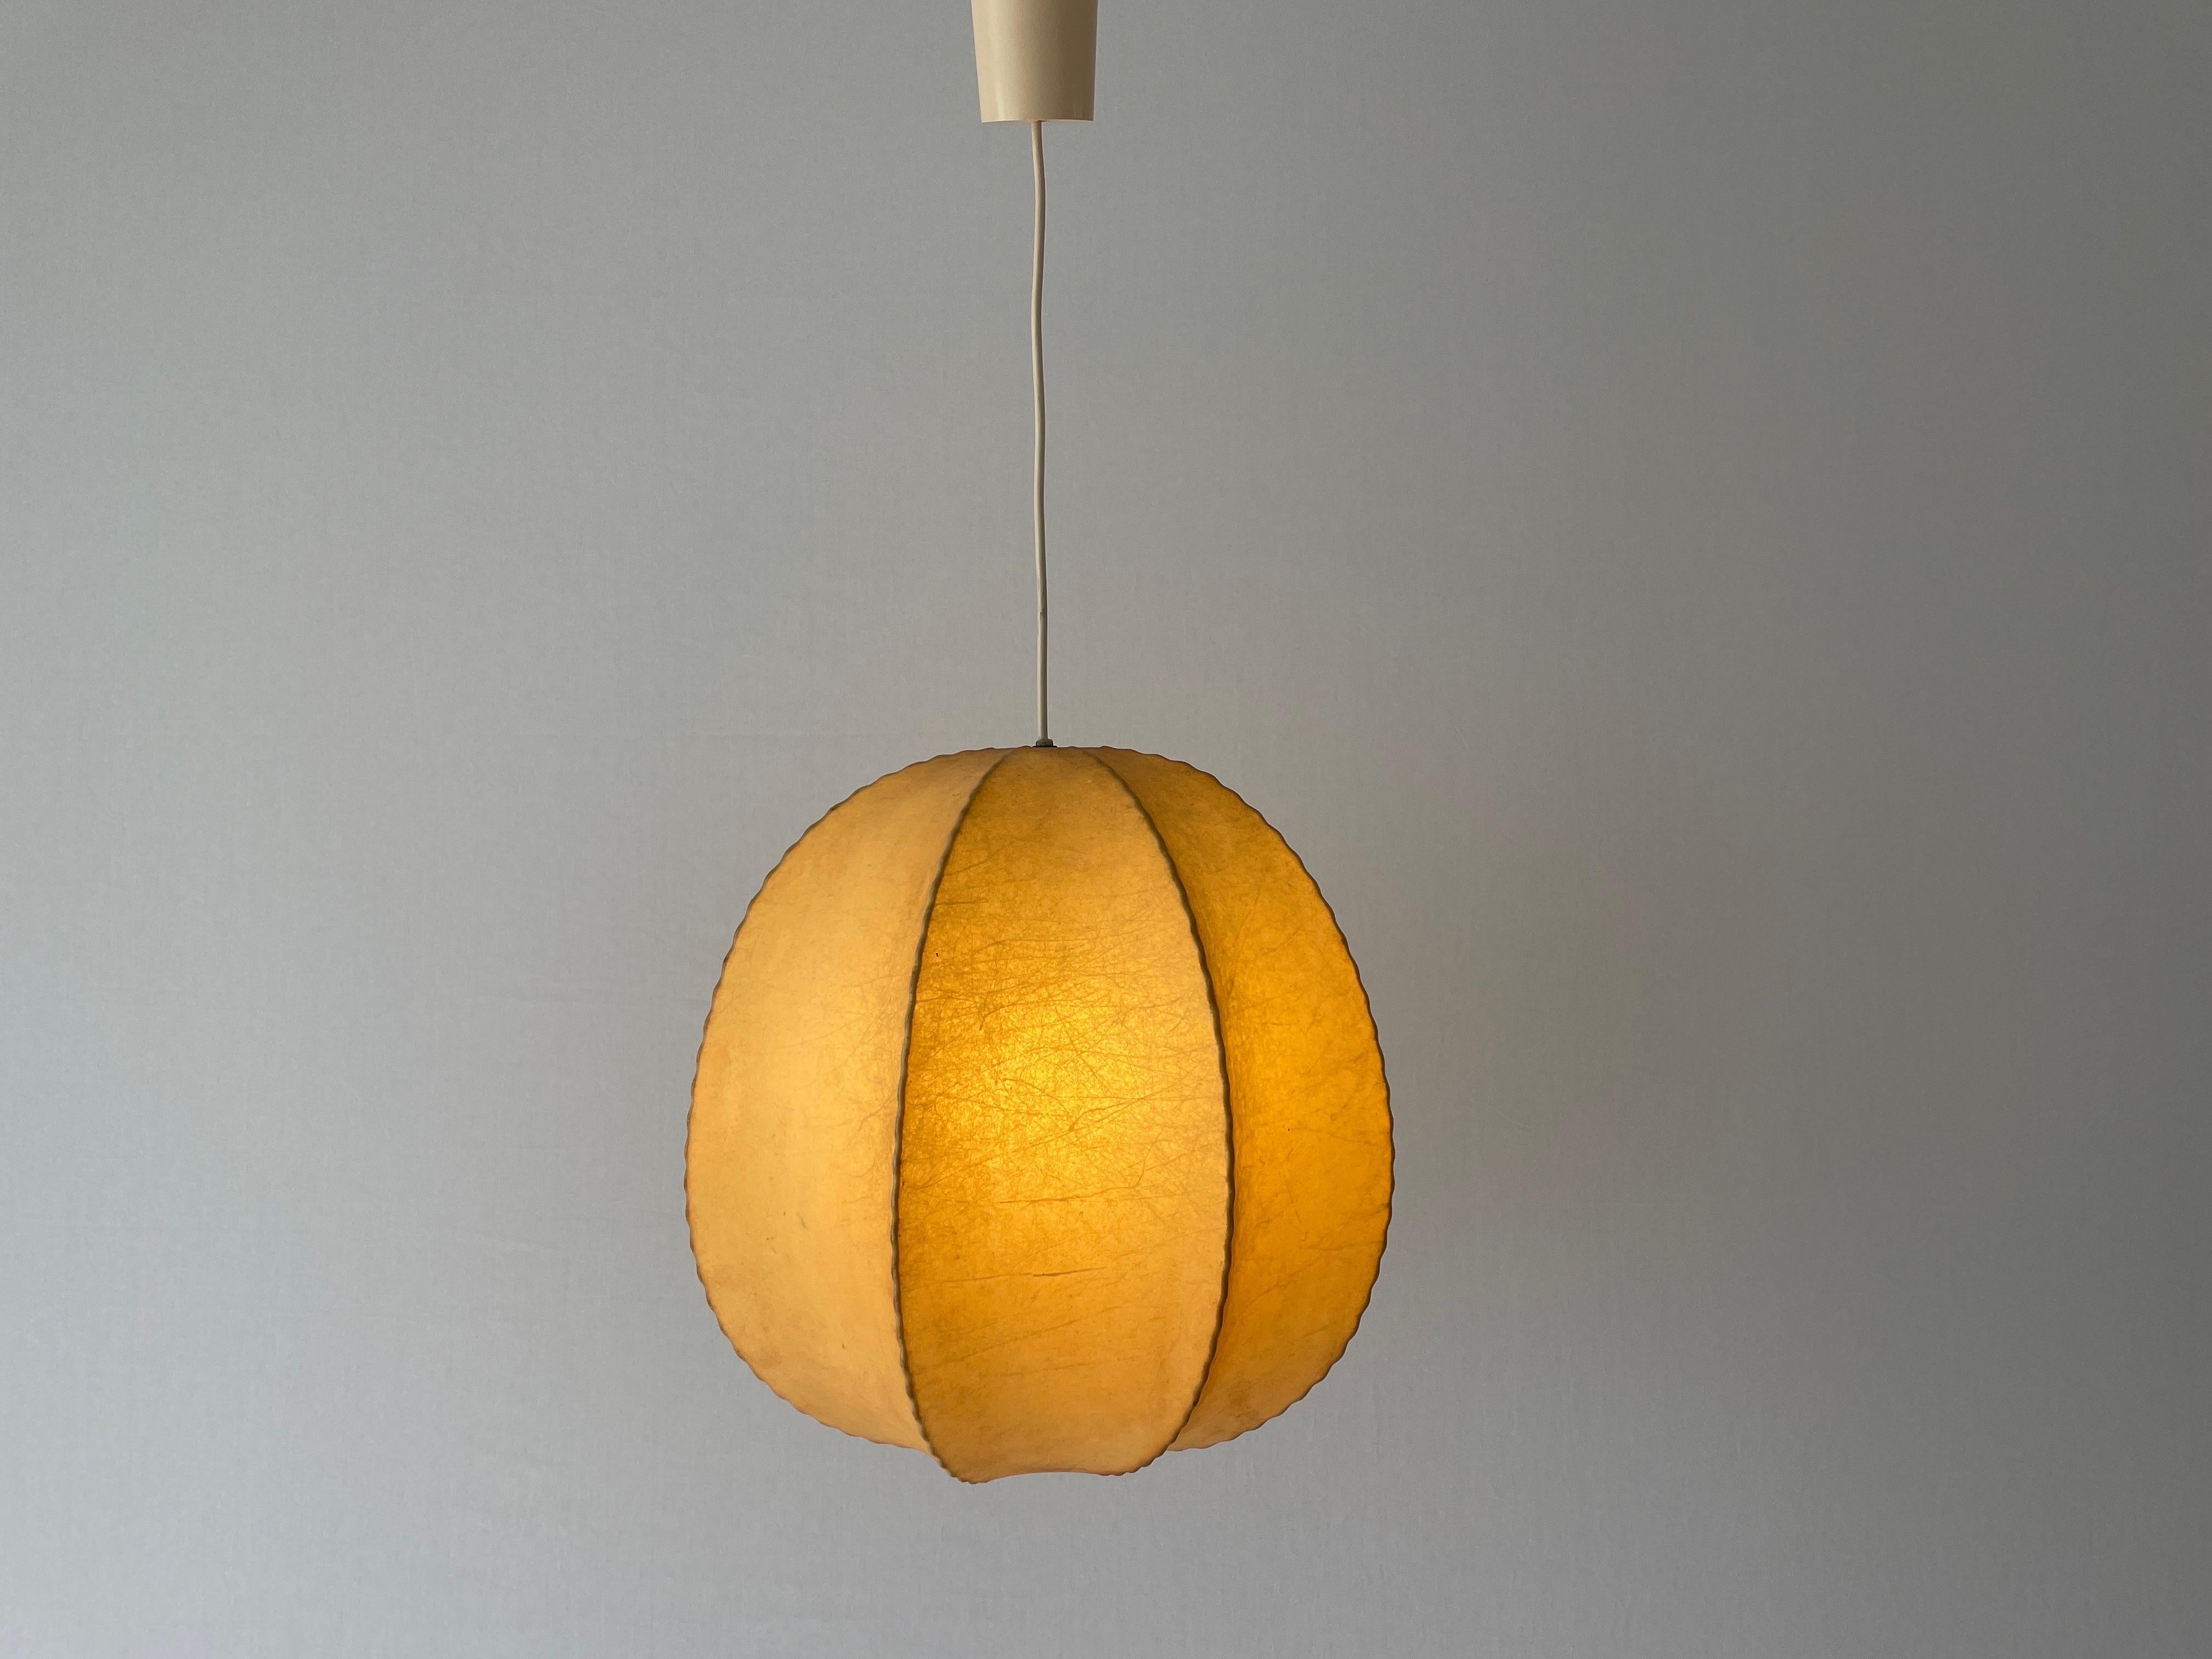 Cocoon Ball Design Pendant Lamp, 1960s, Italy For Sale 8